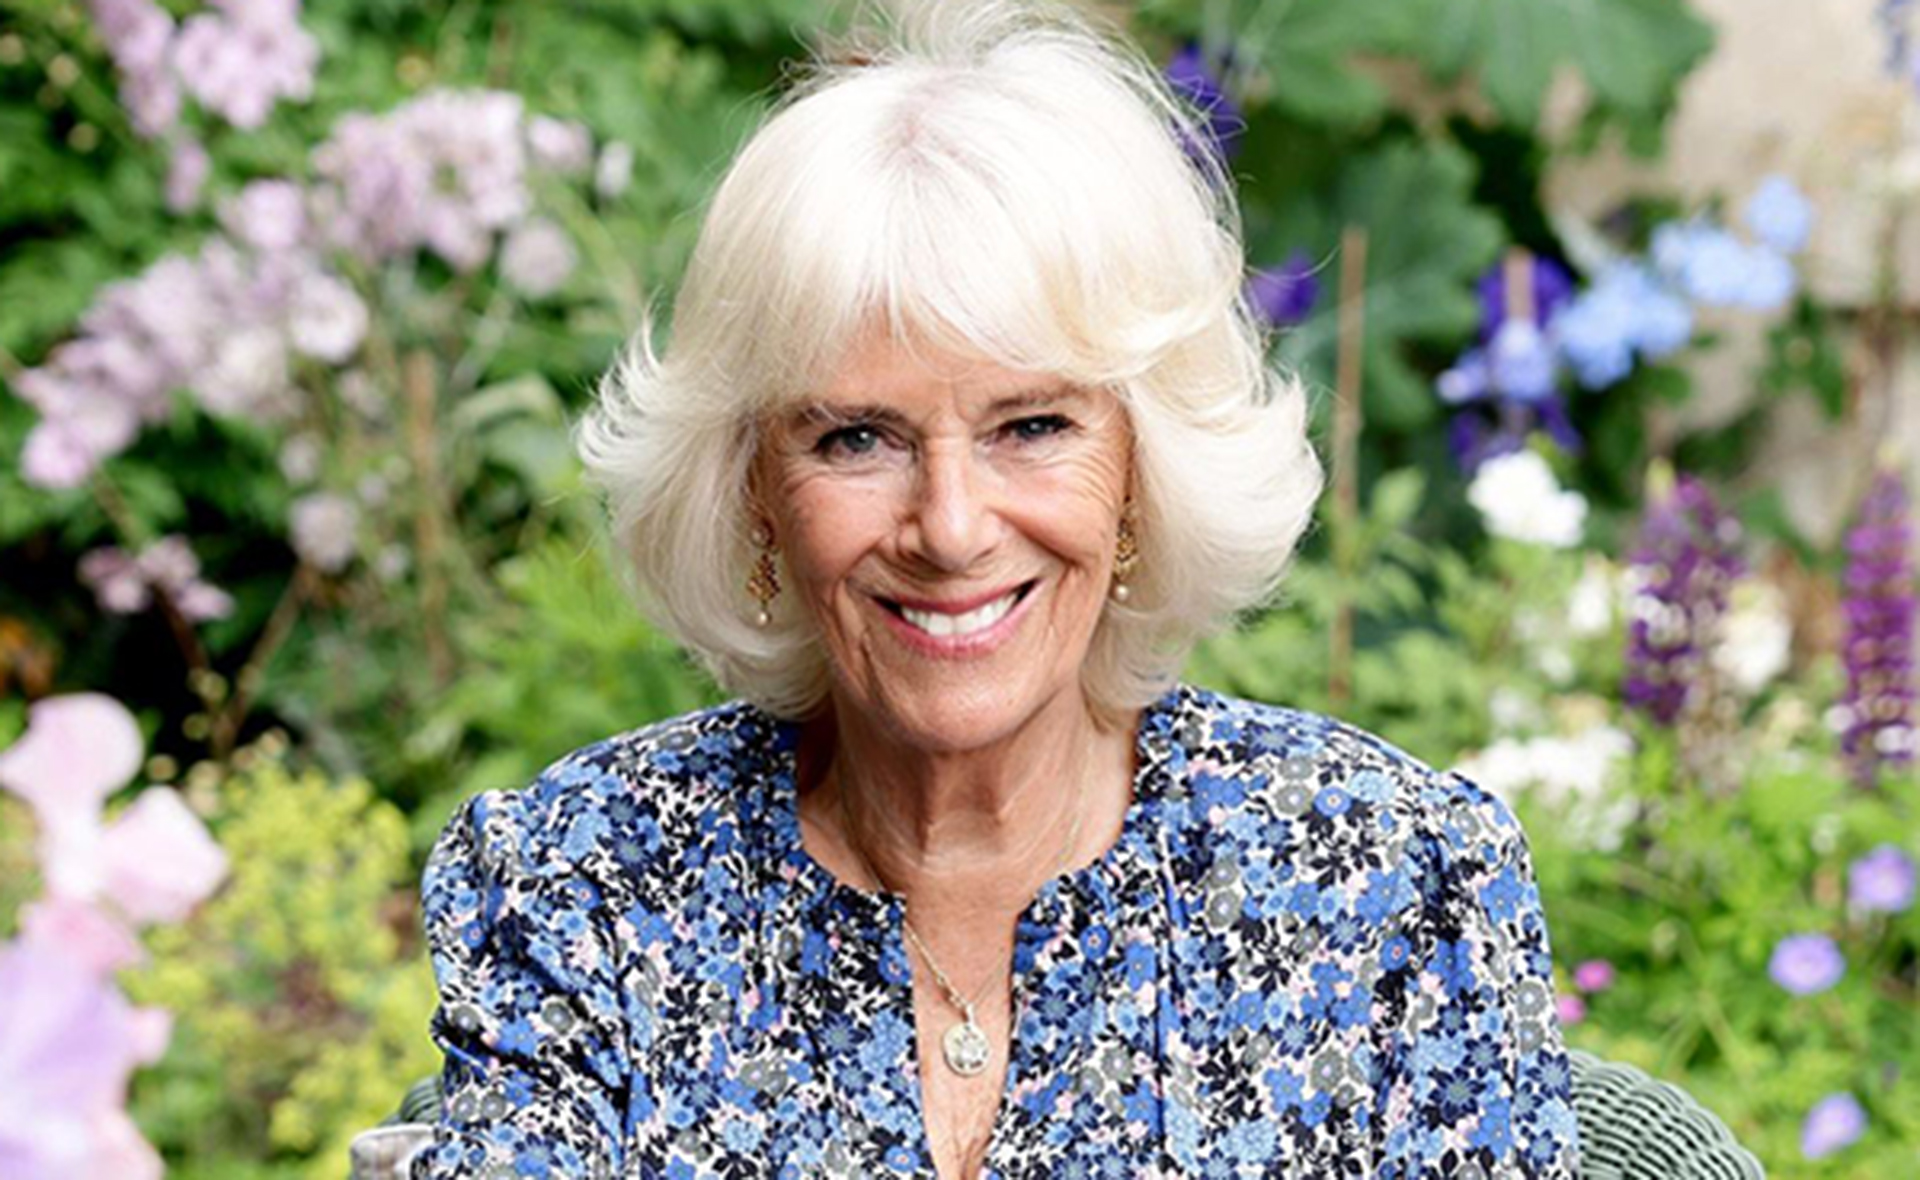 Eagle-eyed fans spot Camilla, Duchess of Cornwall’s hidden talent in her official 75th birthday portraits